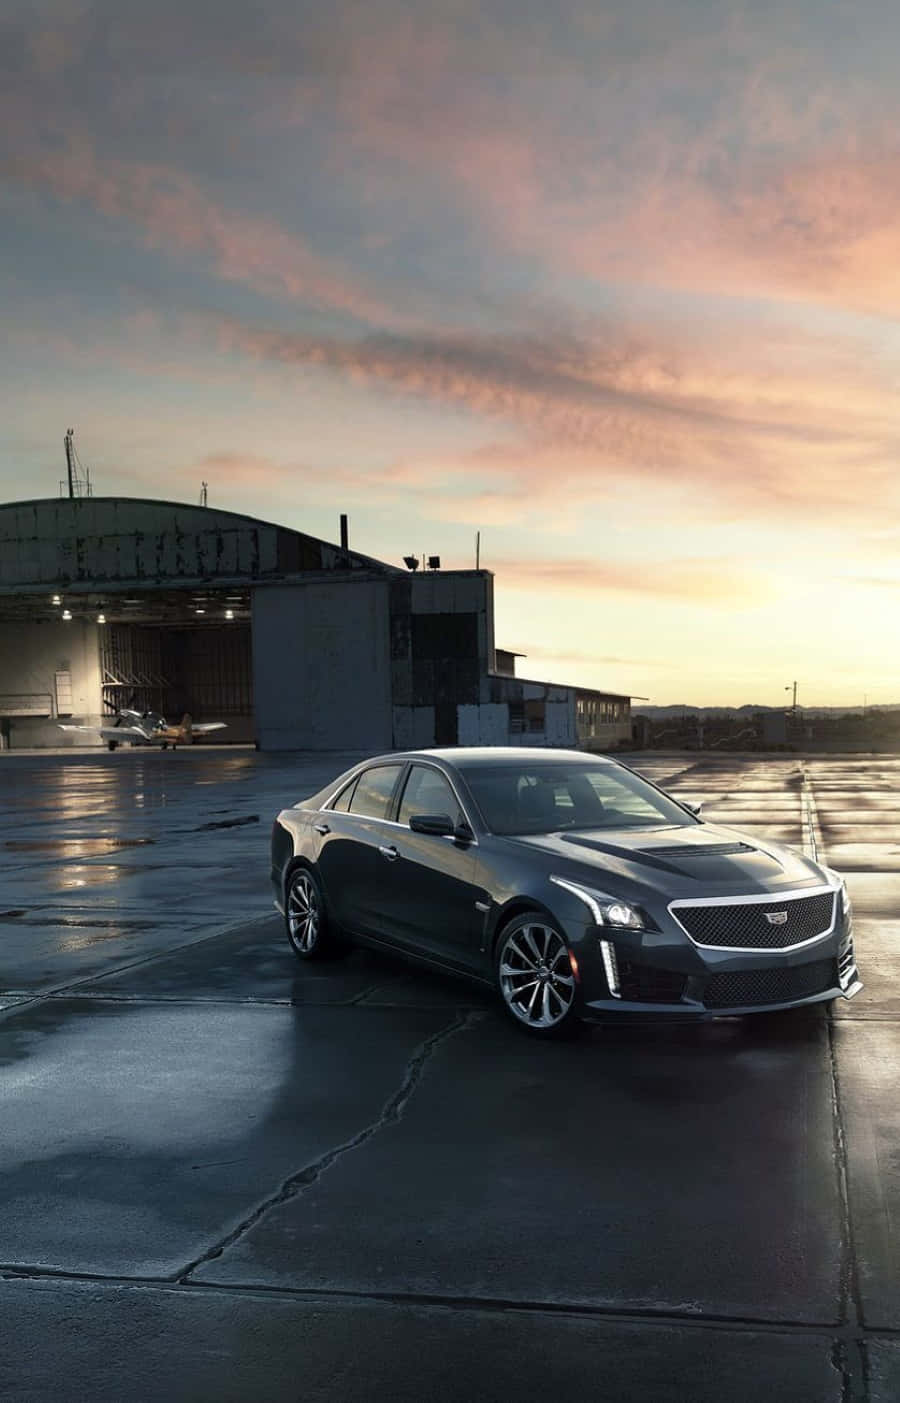 The Sophisticated And High-performance Cadillac Ats Striking A Pose In The City. Wallpaper